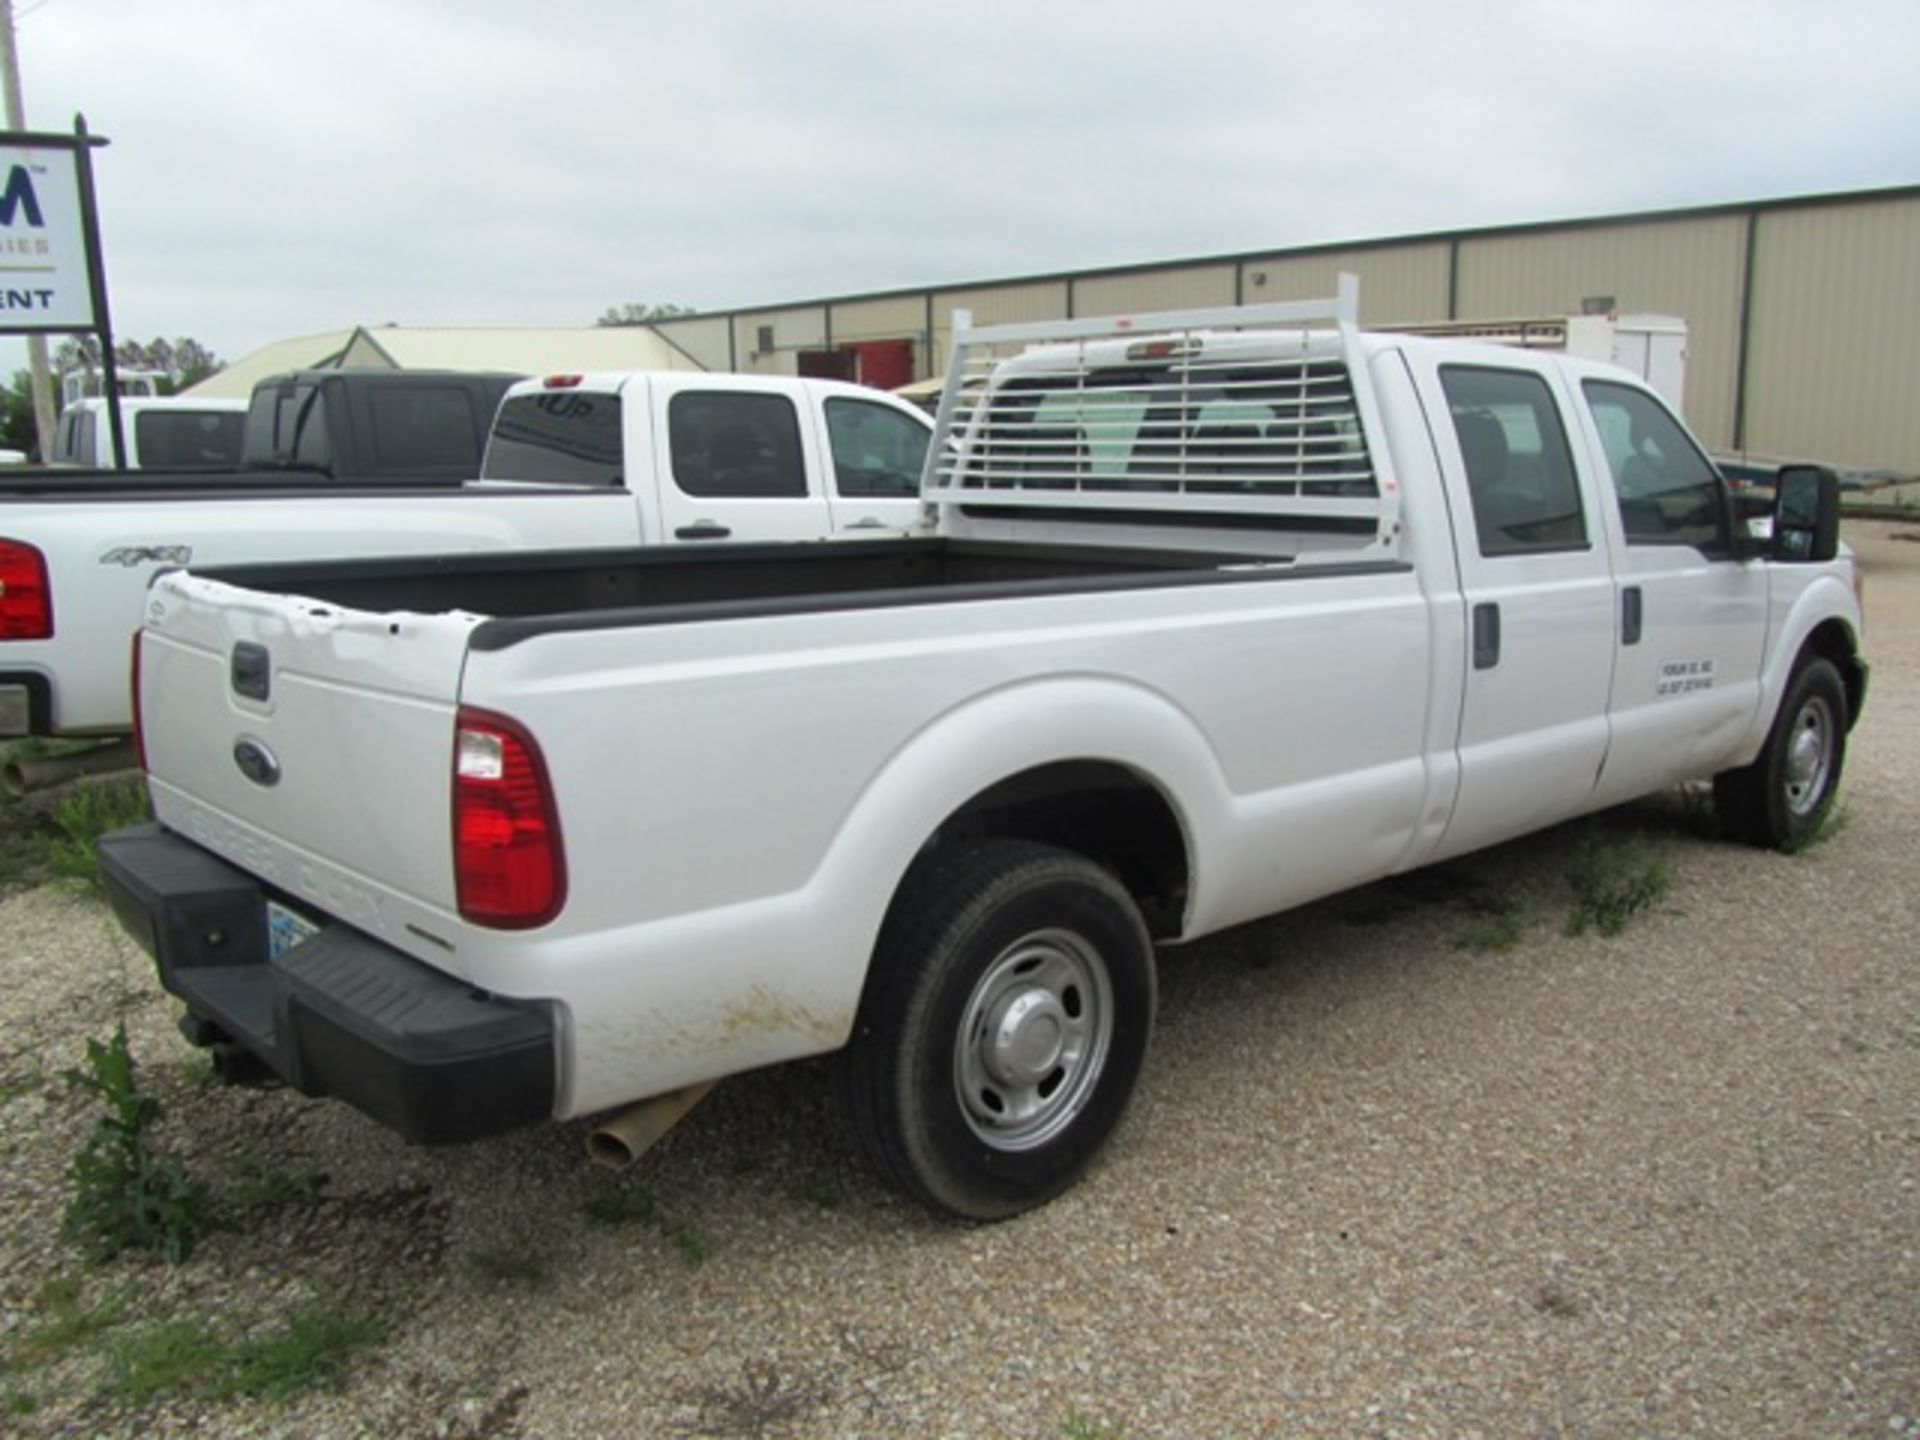 Ford F250 Super Duty Pick-Up Truck - Image 4 of 4